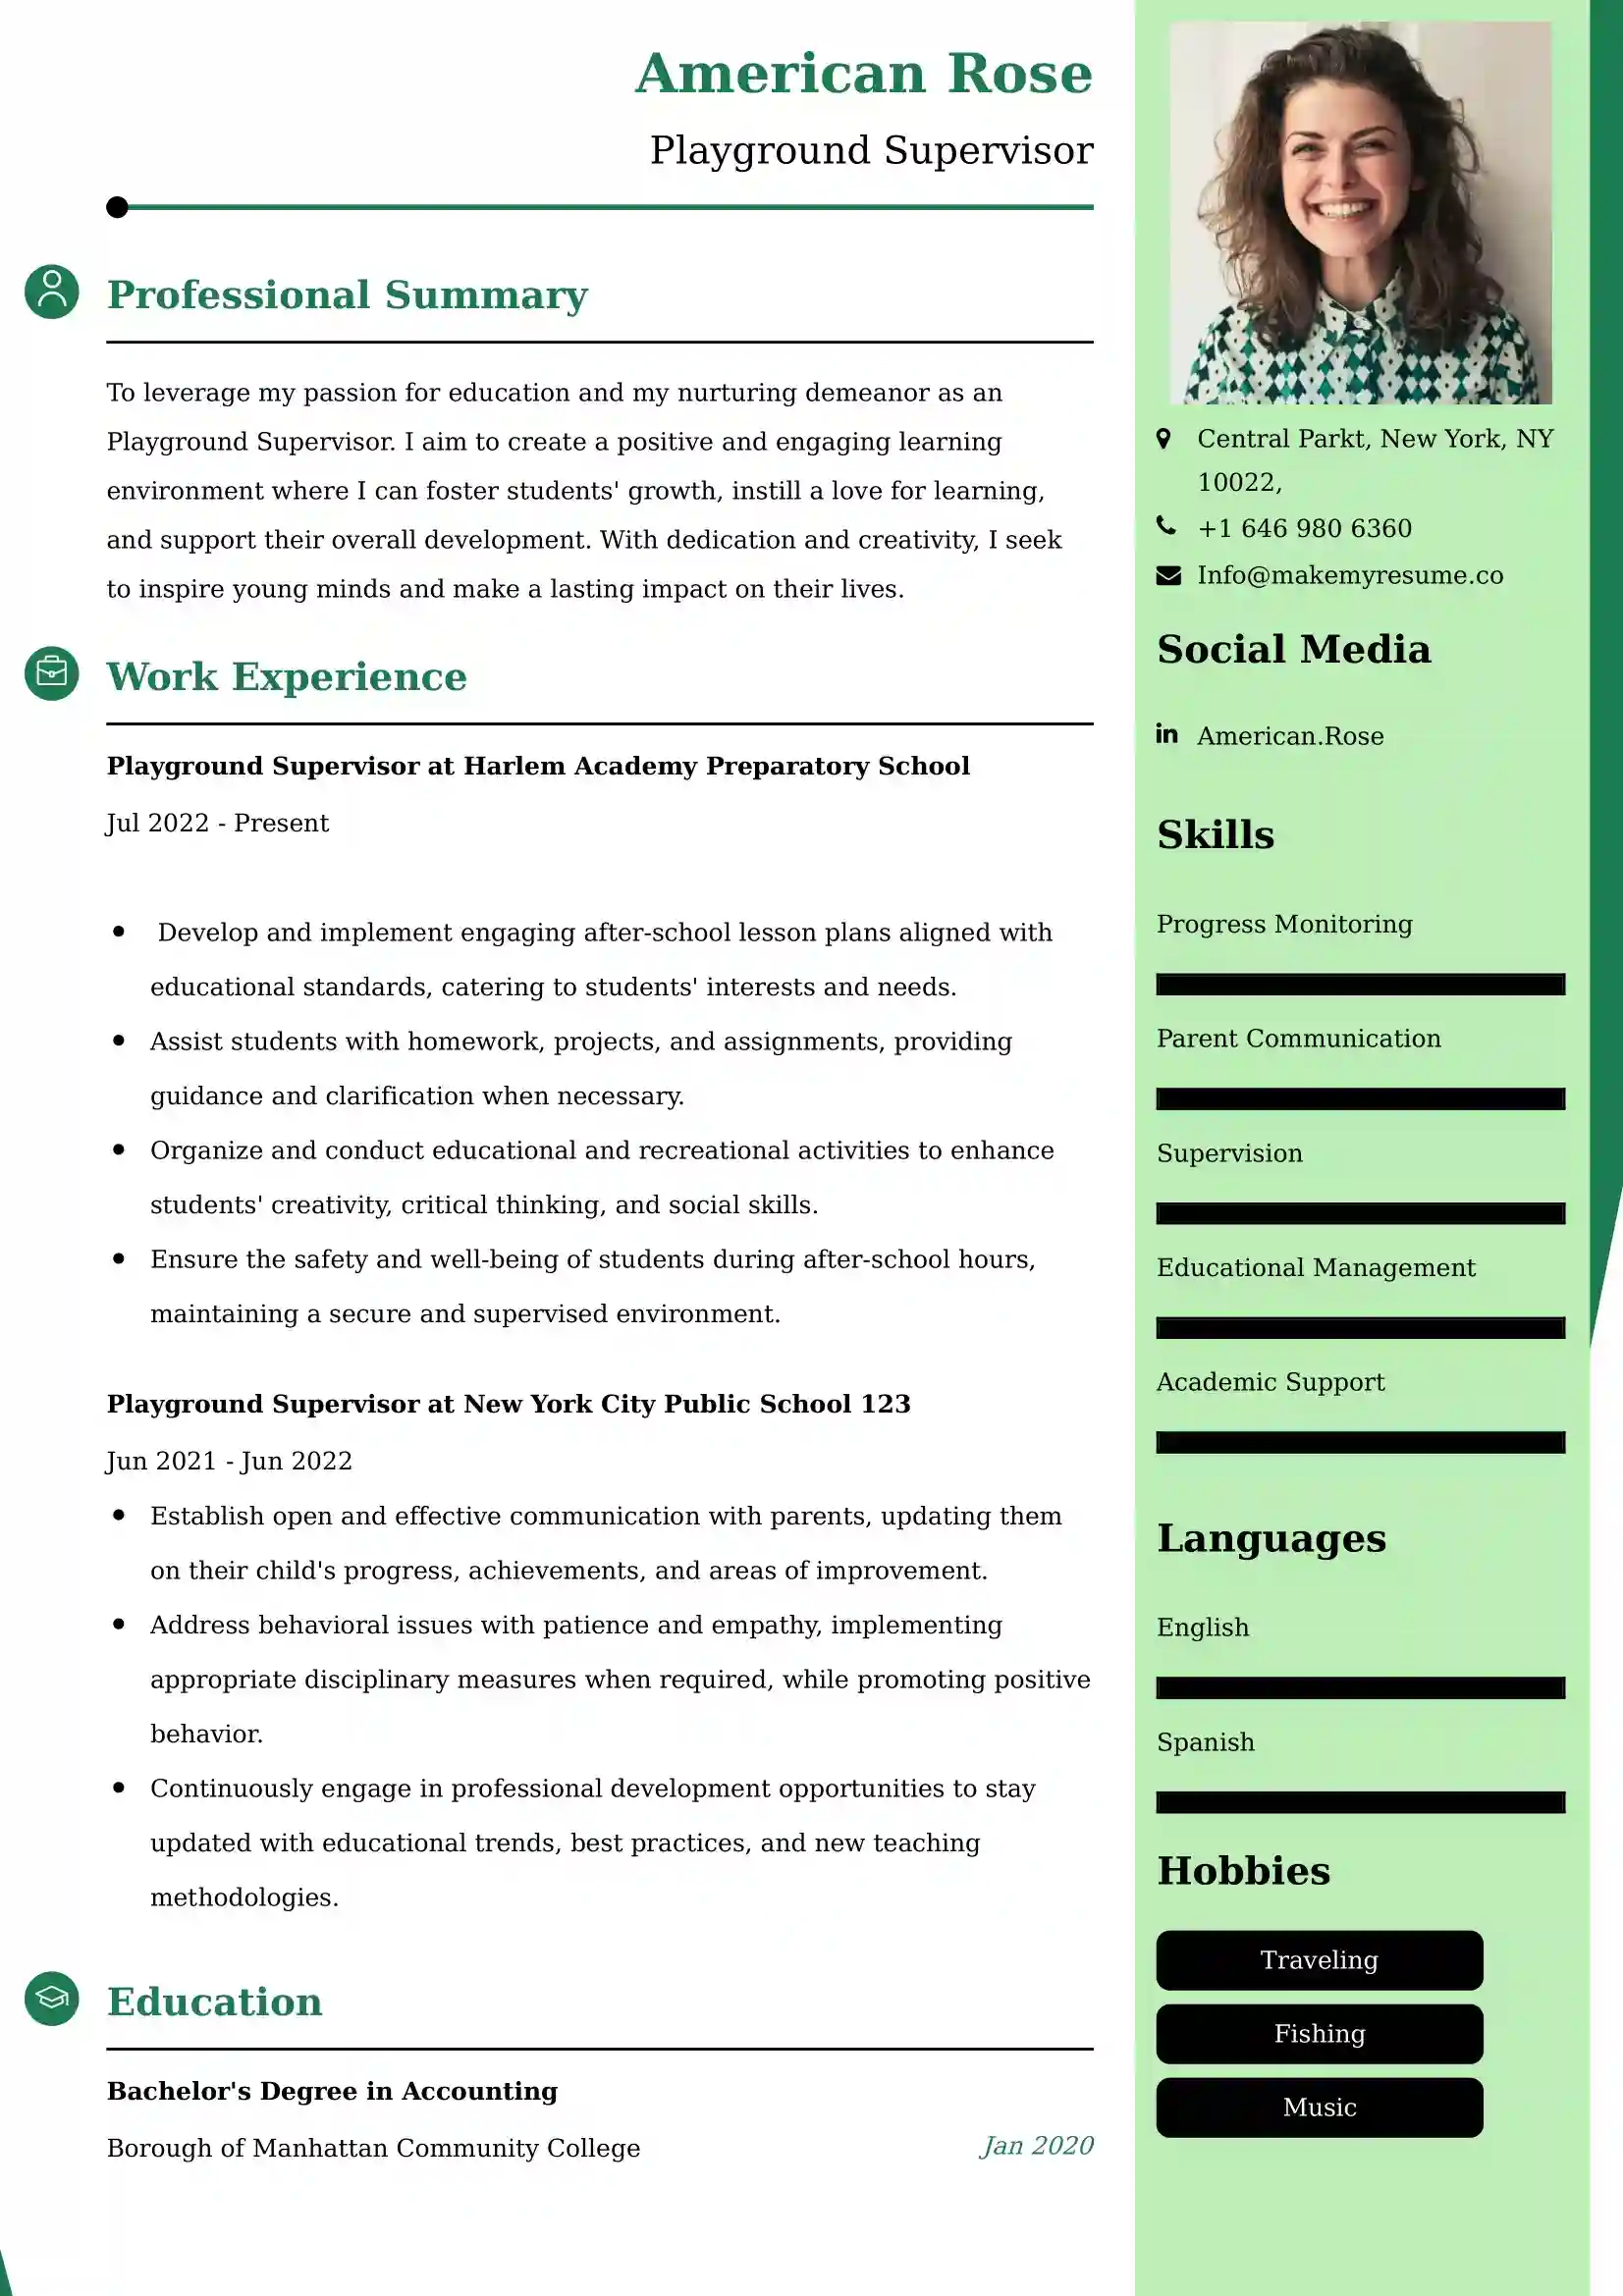 Playground Supervisor Resume Examples - Australian Format and Tips